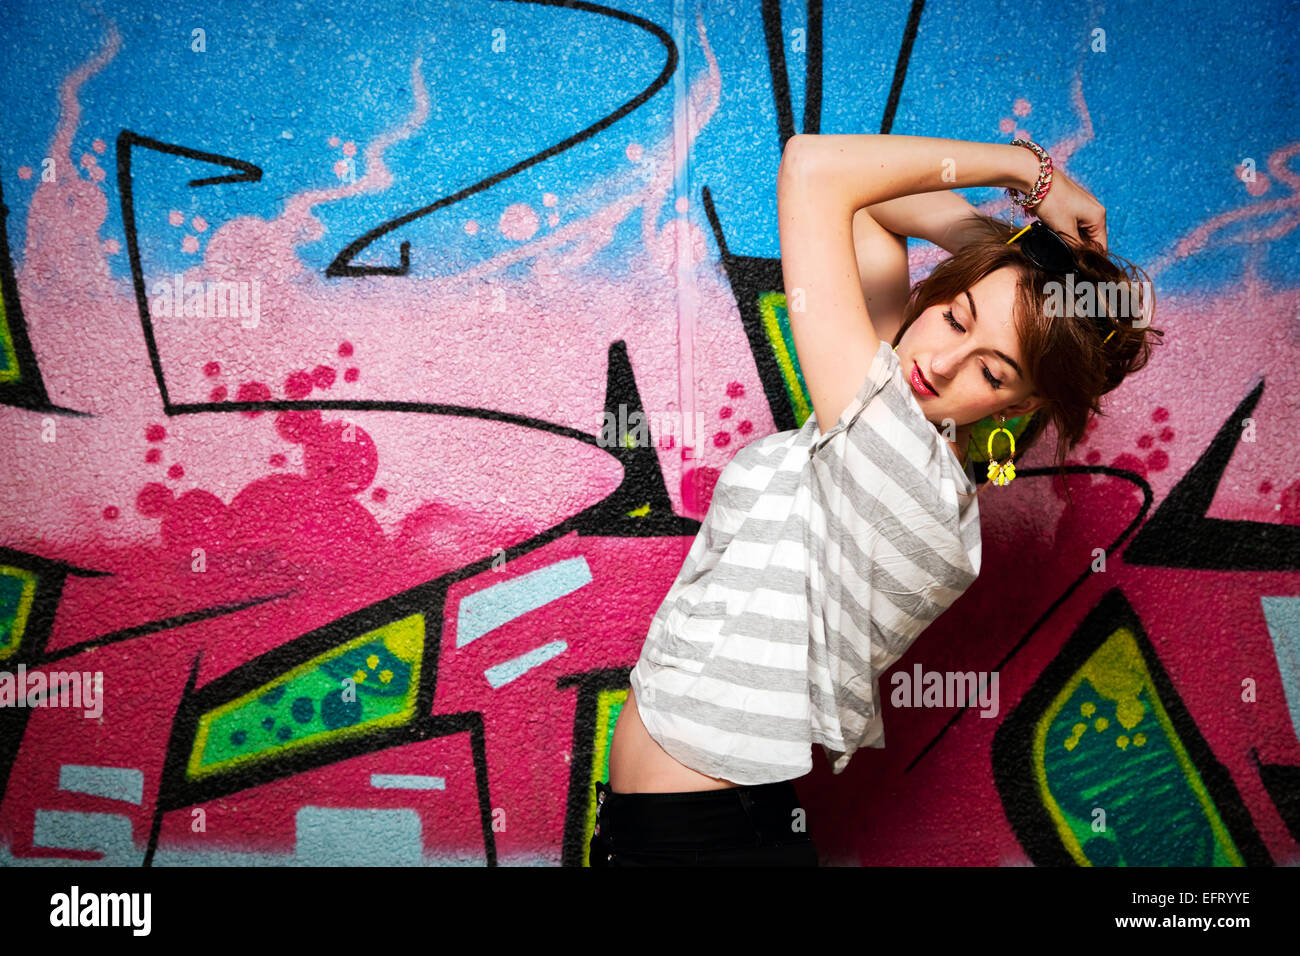 Stylish fashionable girl in a dance pose against colorful graffiti wall. Fashion, trends, subculture. Stock Photo